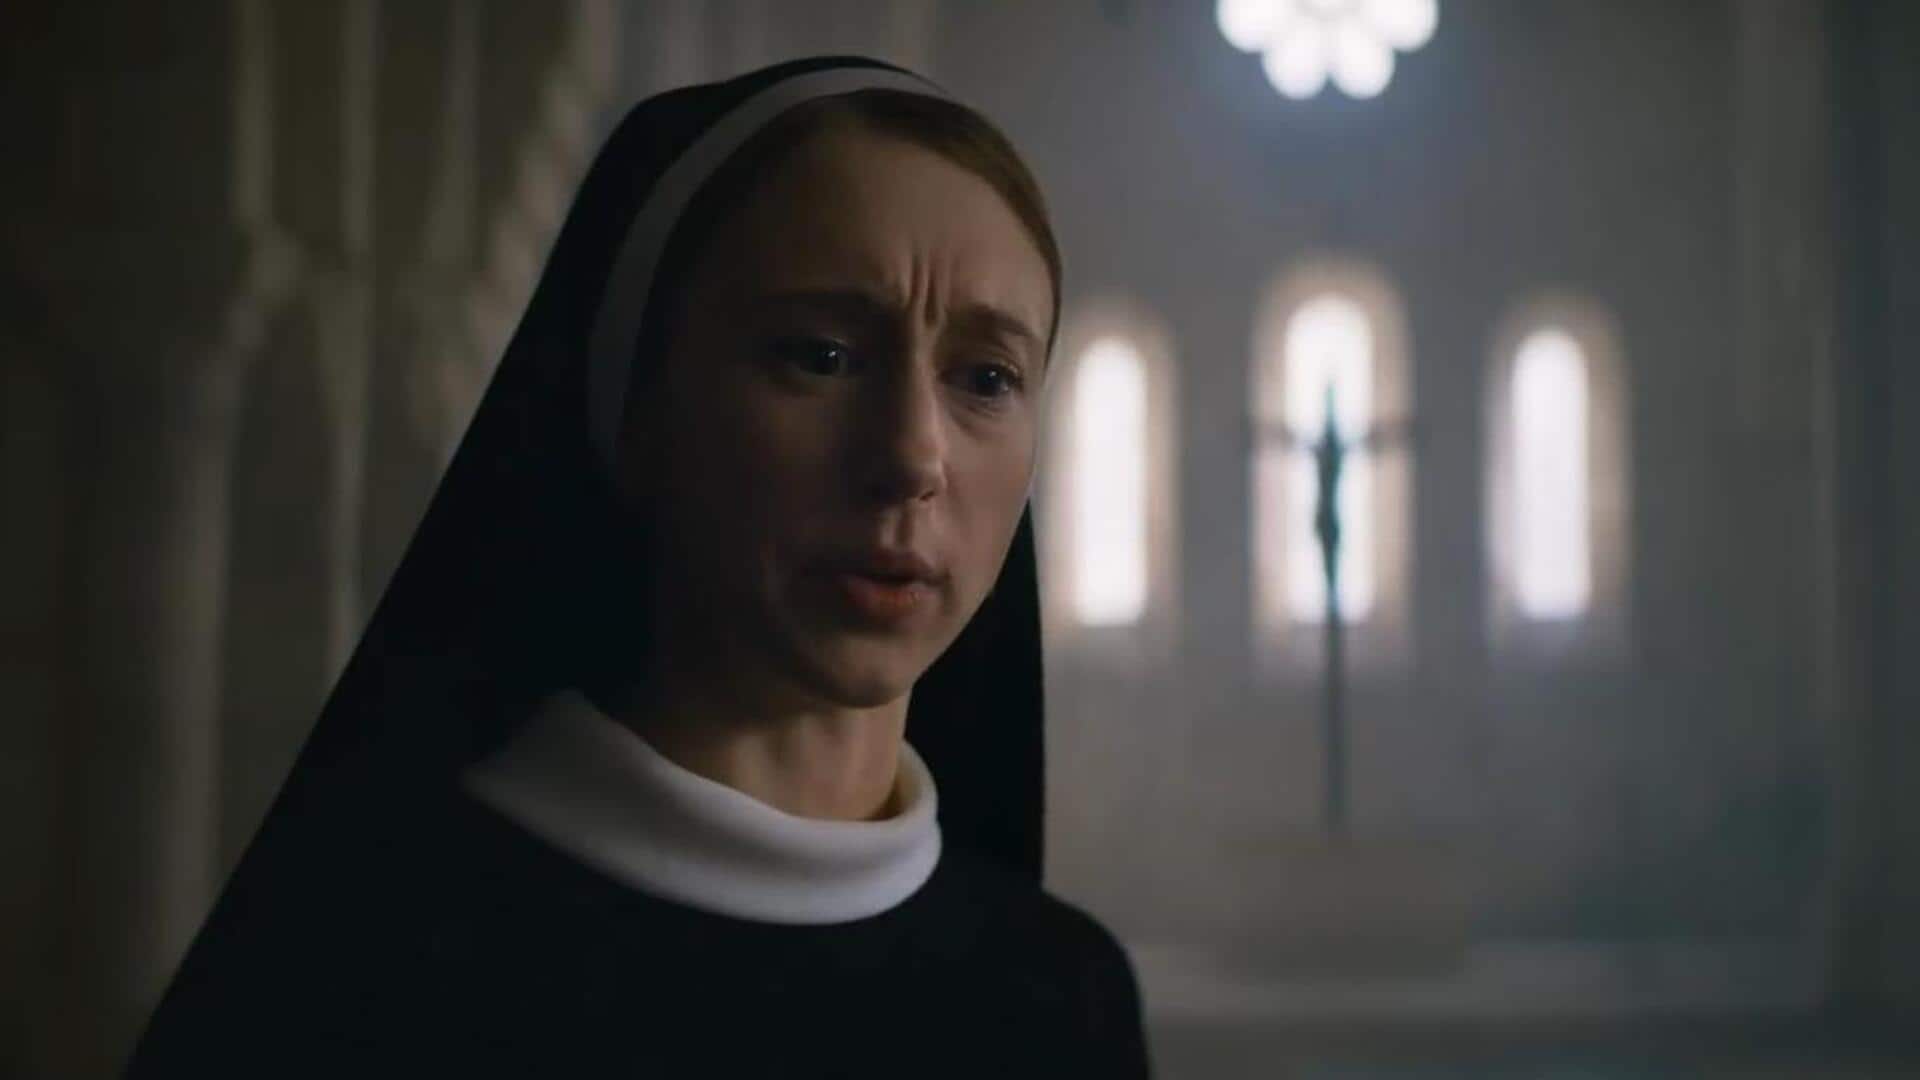 Box office collection: 'The Nun II' disappoints globally with $62M